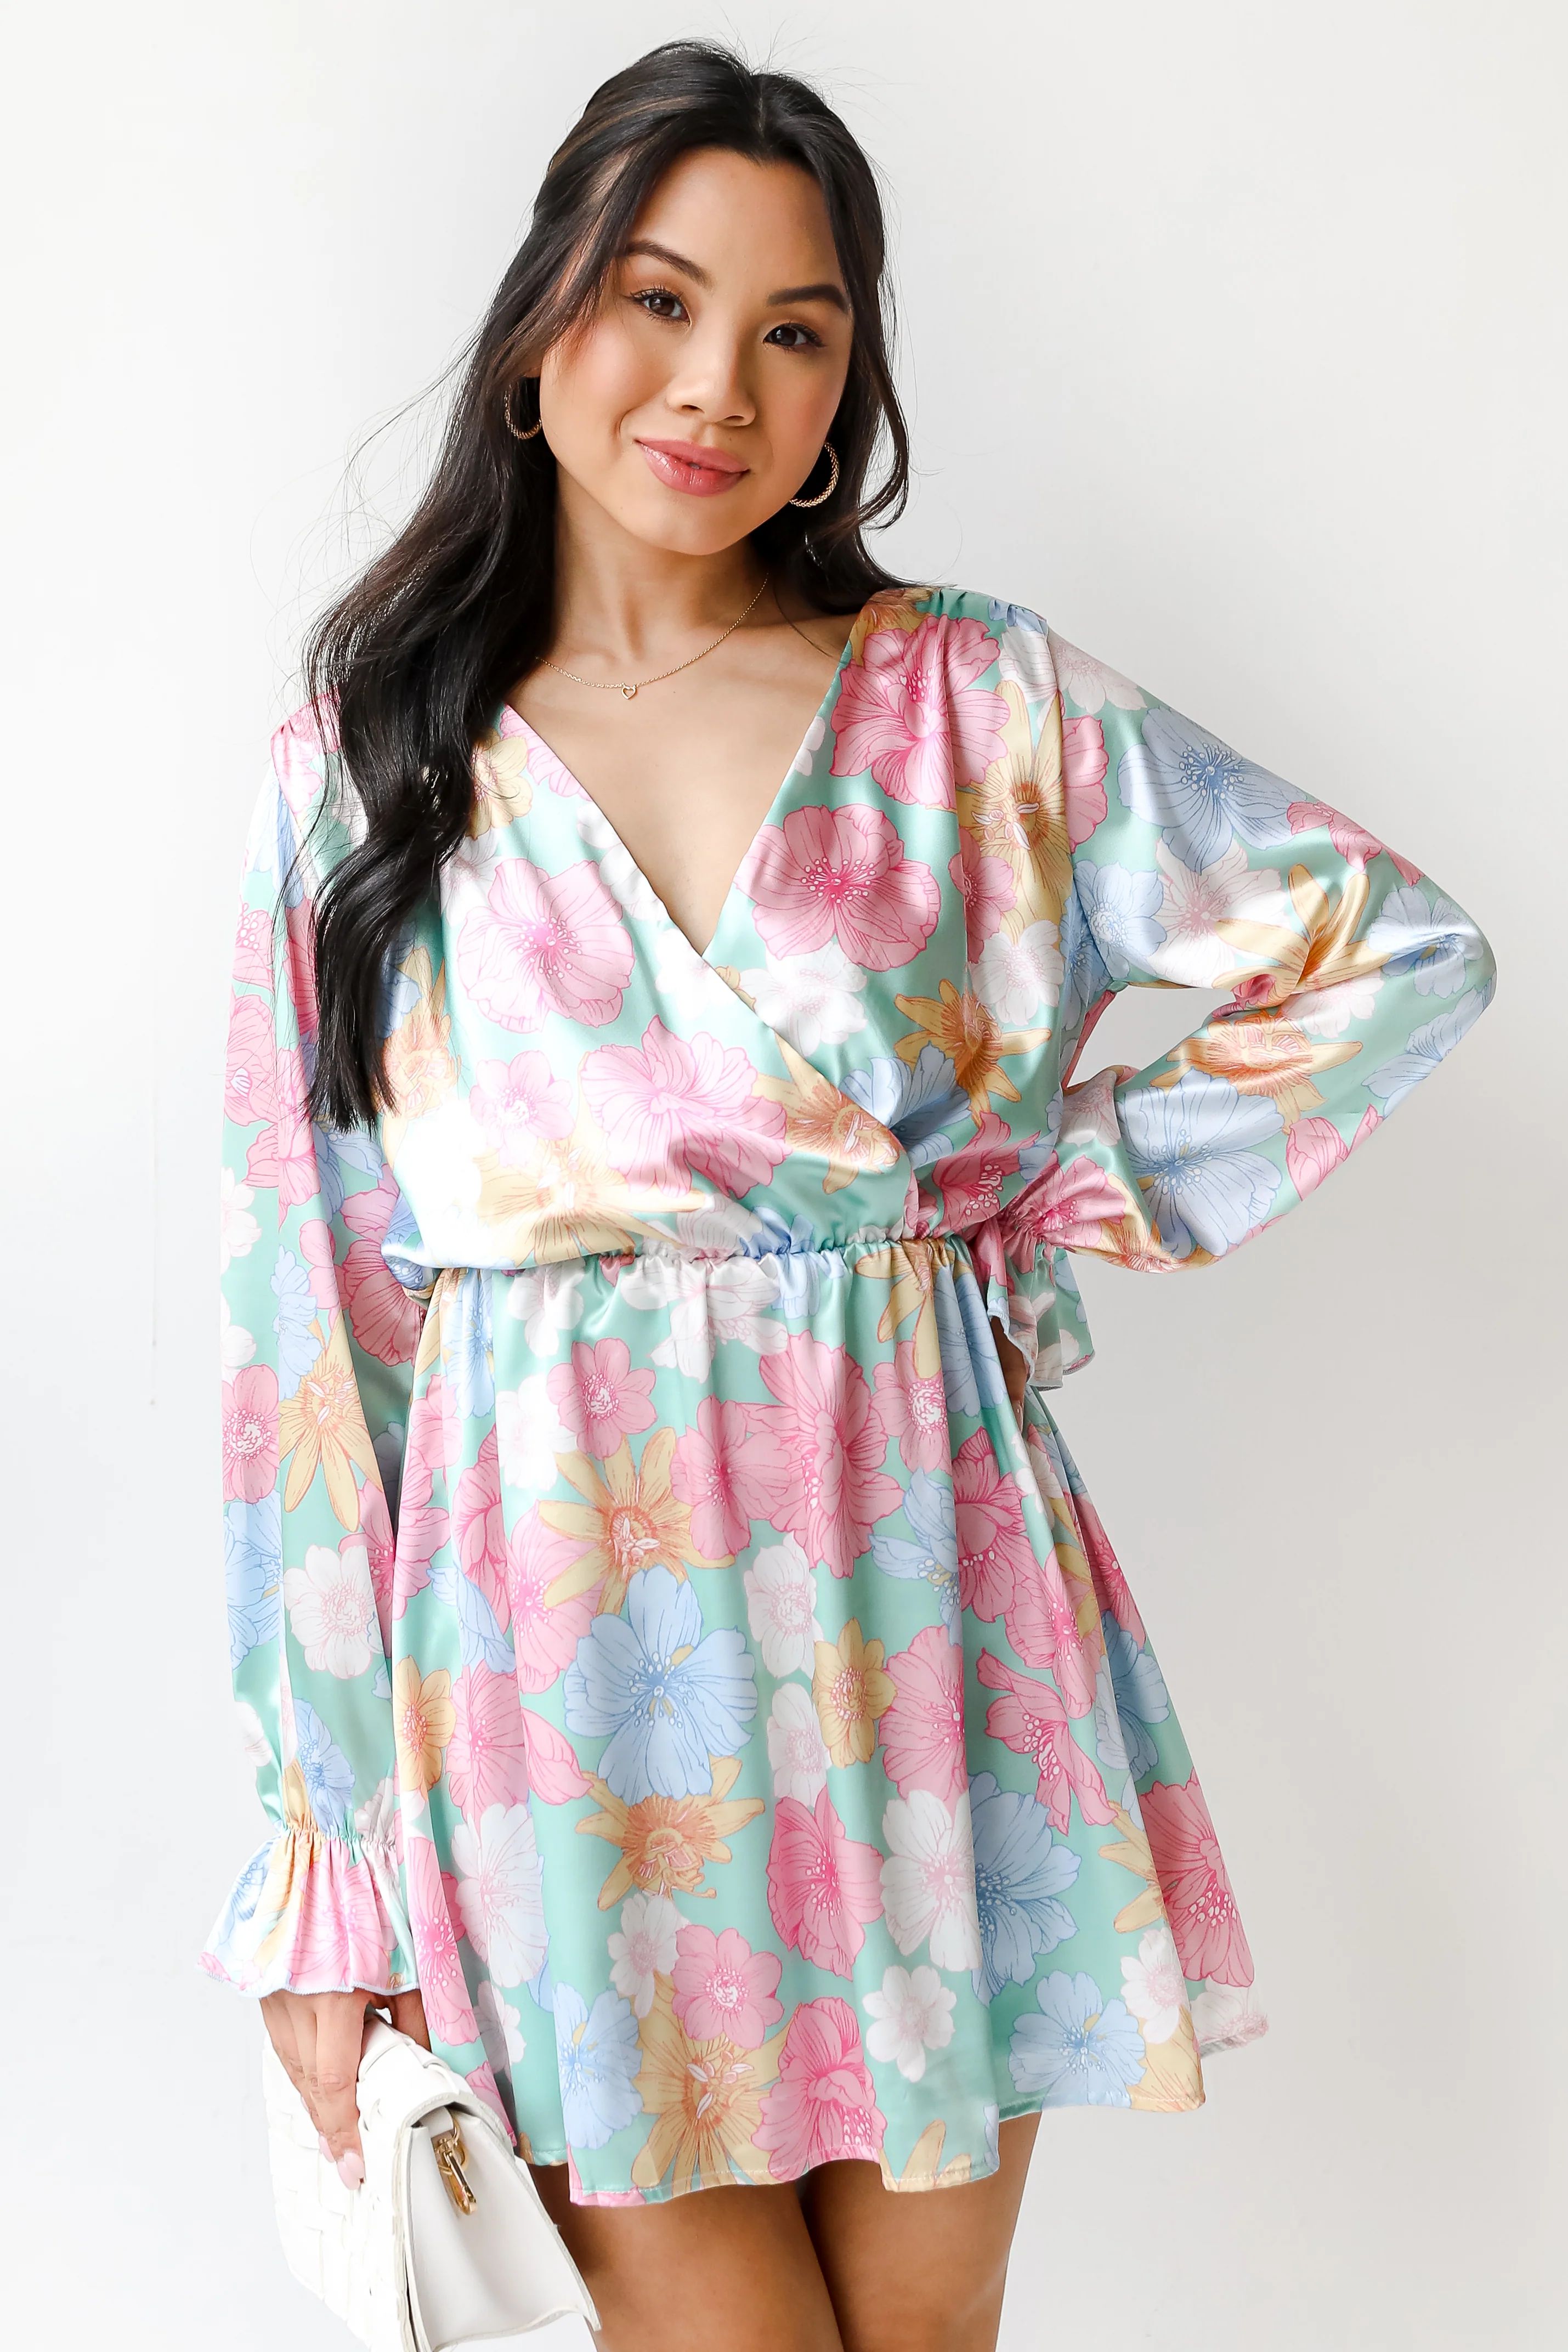 Chance of Blooms Floral Dress | Dress Up